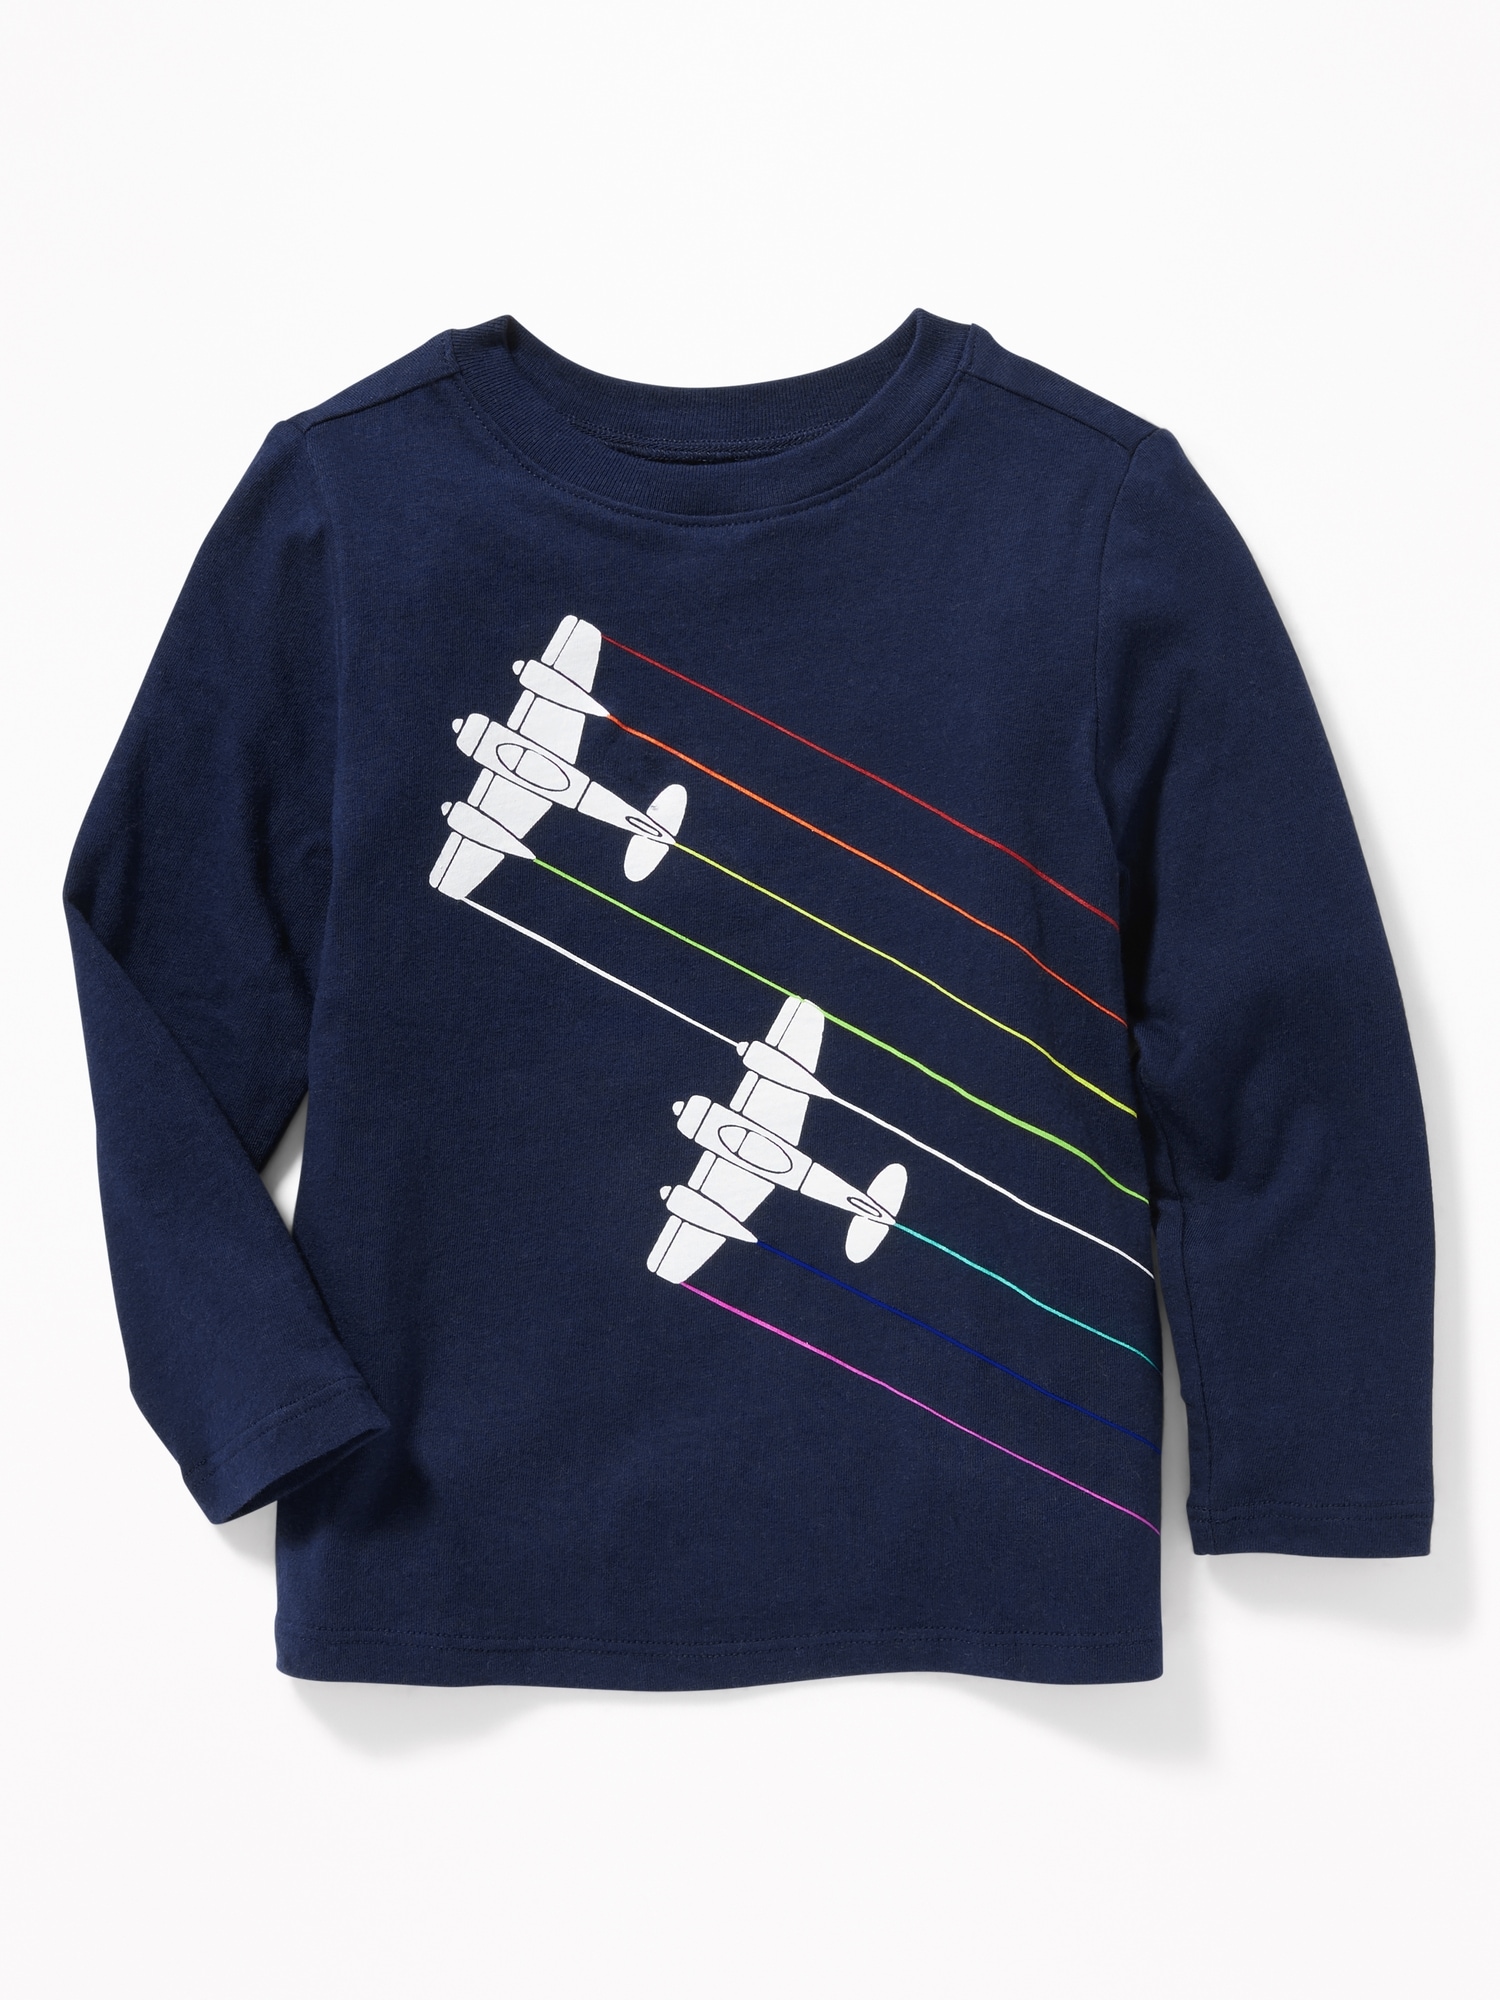 Graphic Long-Sleeve Tee for Toddler Boys